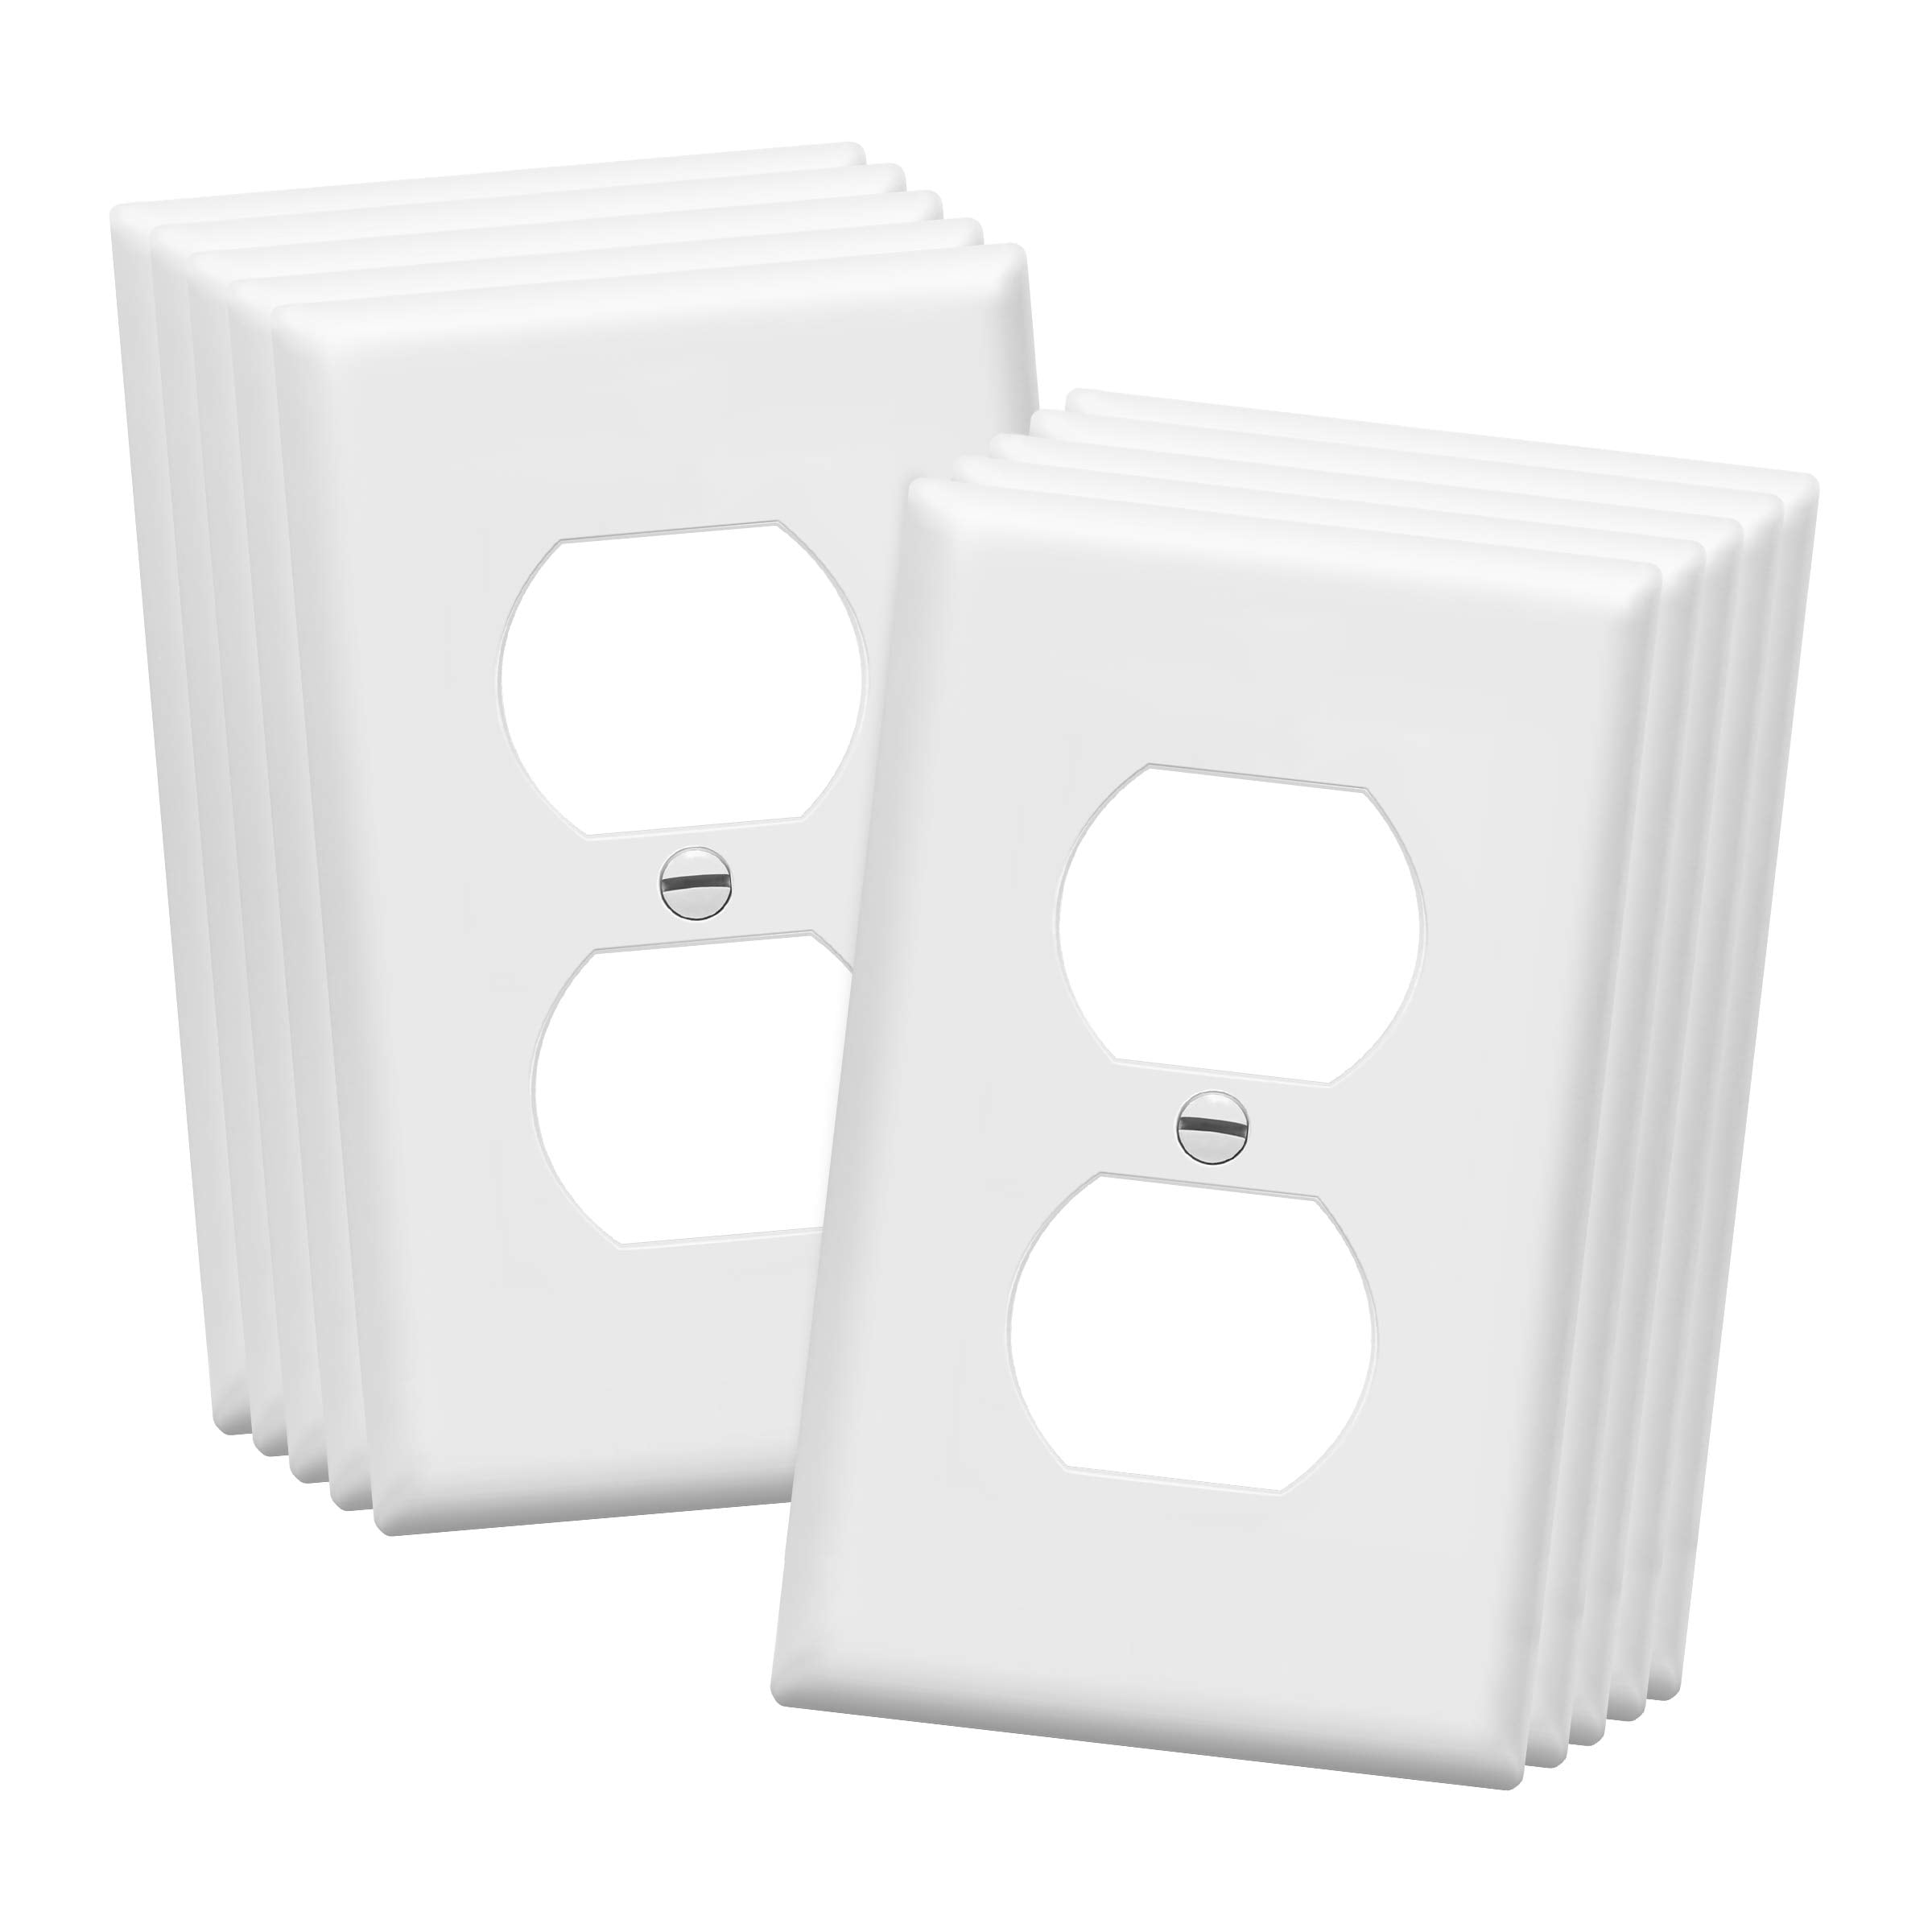 Duplex Wall Plates Kit, Electrical Outlet Covers, Standard Size 1-Gang  4.50 x 2.76, Unbreakable Polycarbonate Thermoplastic, Electric Receptacle